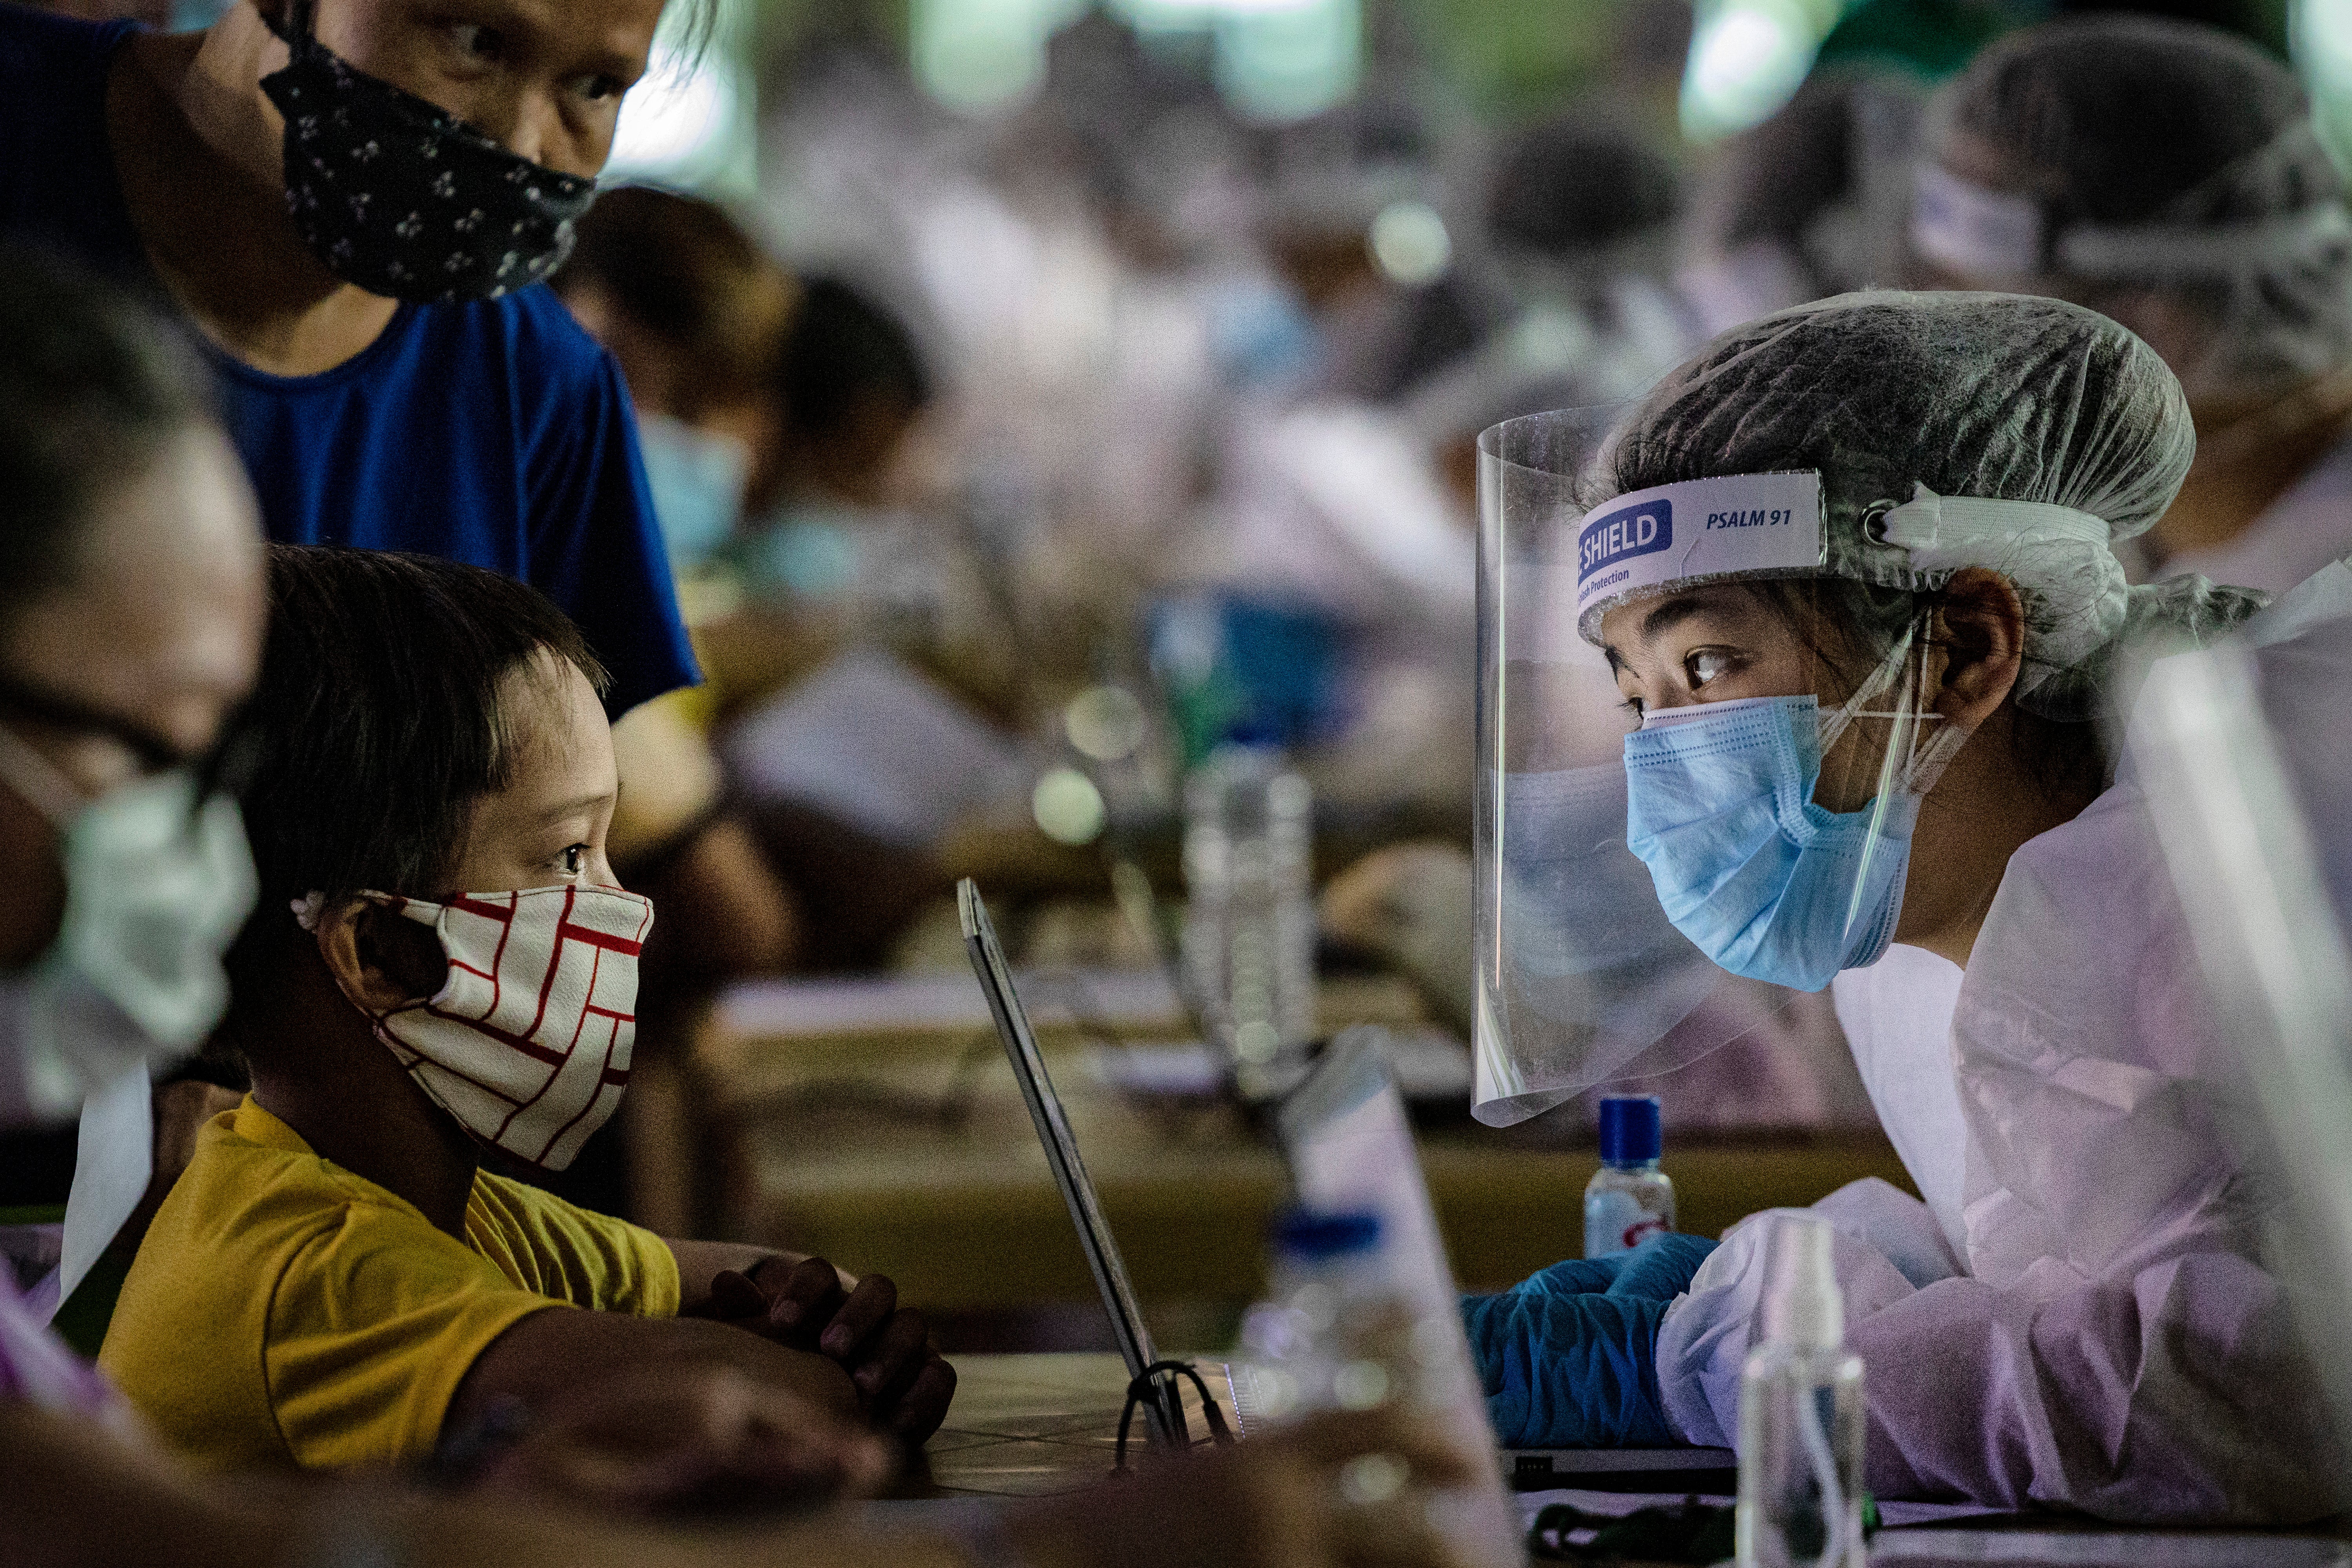 A medical worker wearing personal protective equipment interviews a child queueing for free COVID-19 swab testing at a basketball court on 6 August, 2020 in Navotas city, Metro Manila, Philippines. Residents in the country will now be made to wear full face shields, as well as face masks when out in public